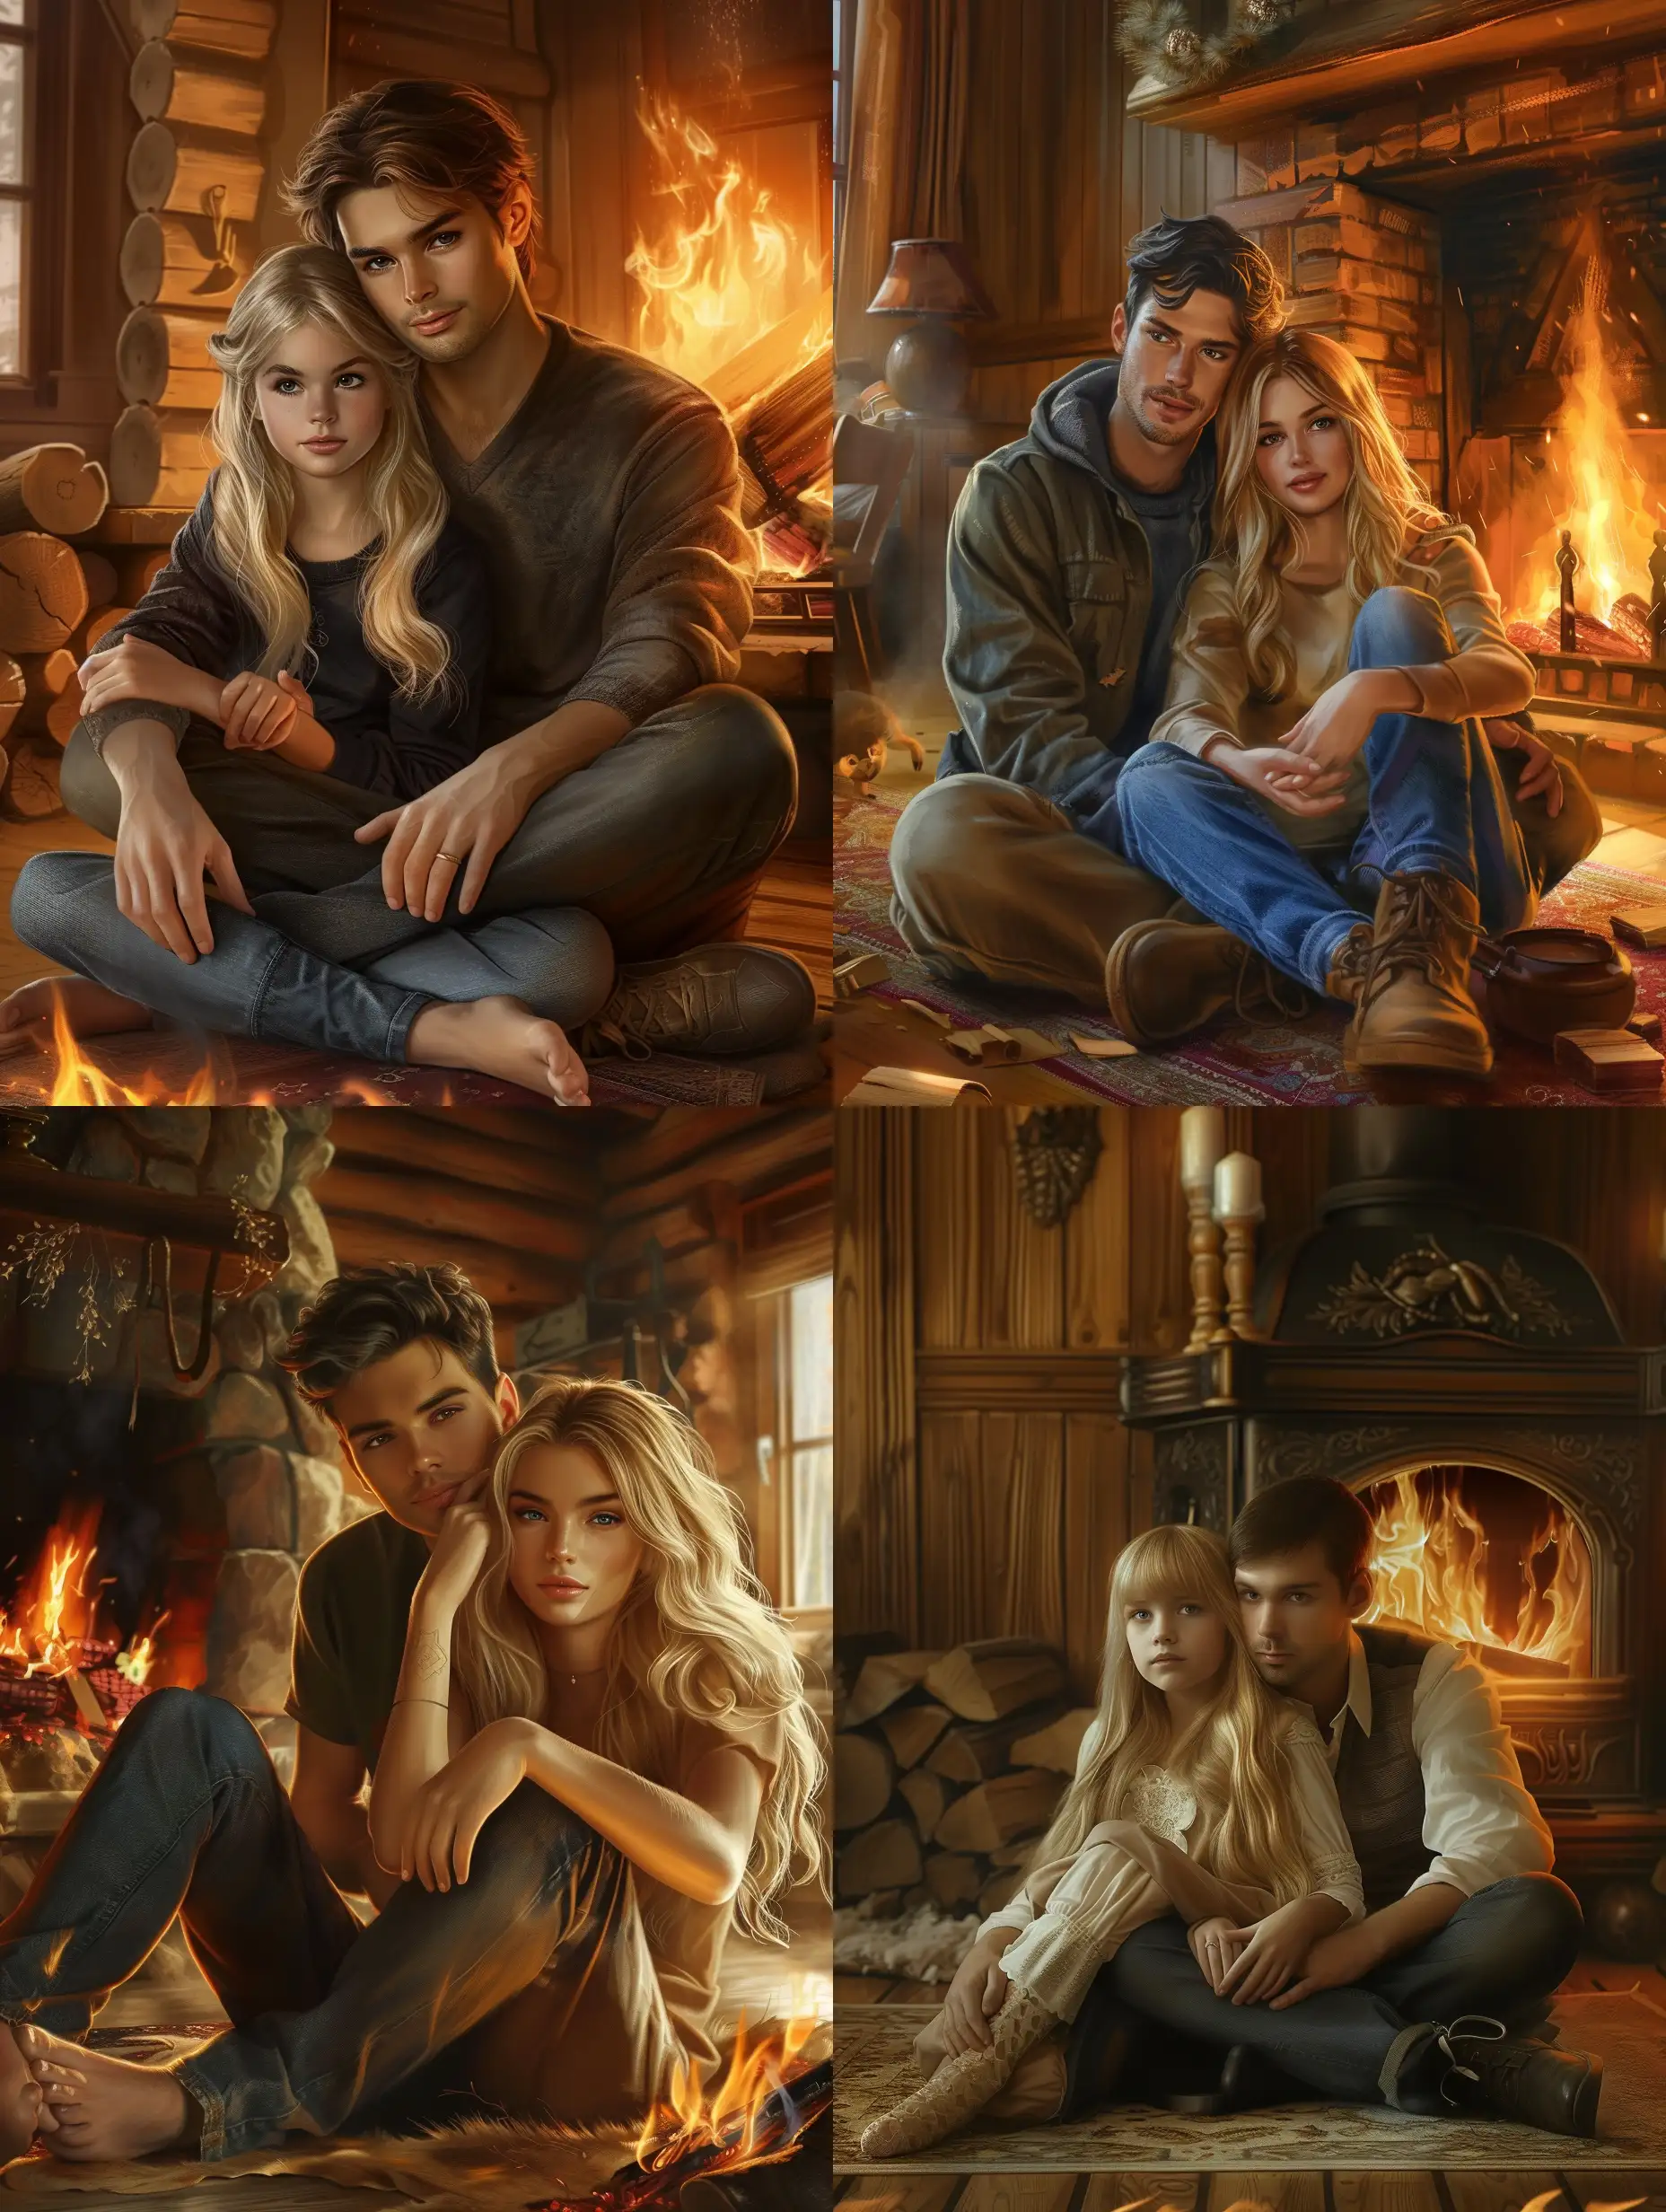 Cozy-Fireplace-Moment-Man-and-Girl-with-Beautiful-Blonde-Hair